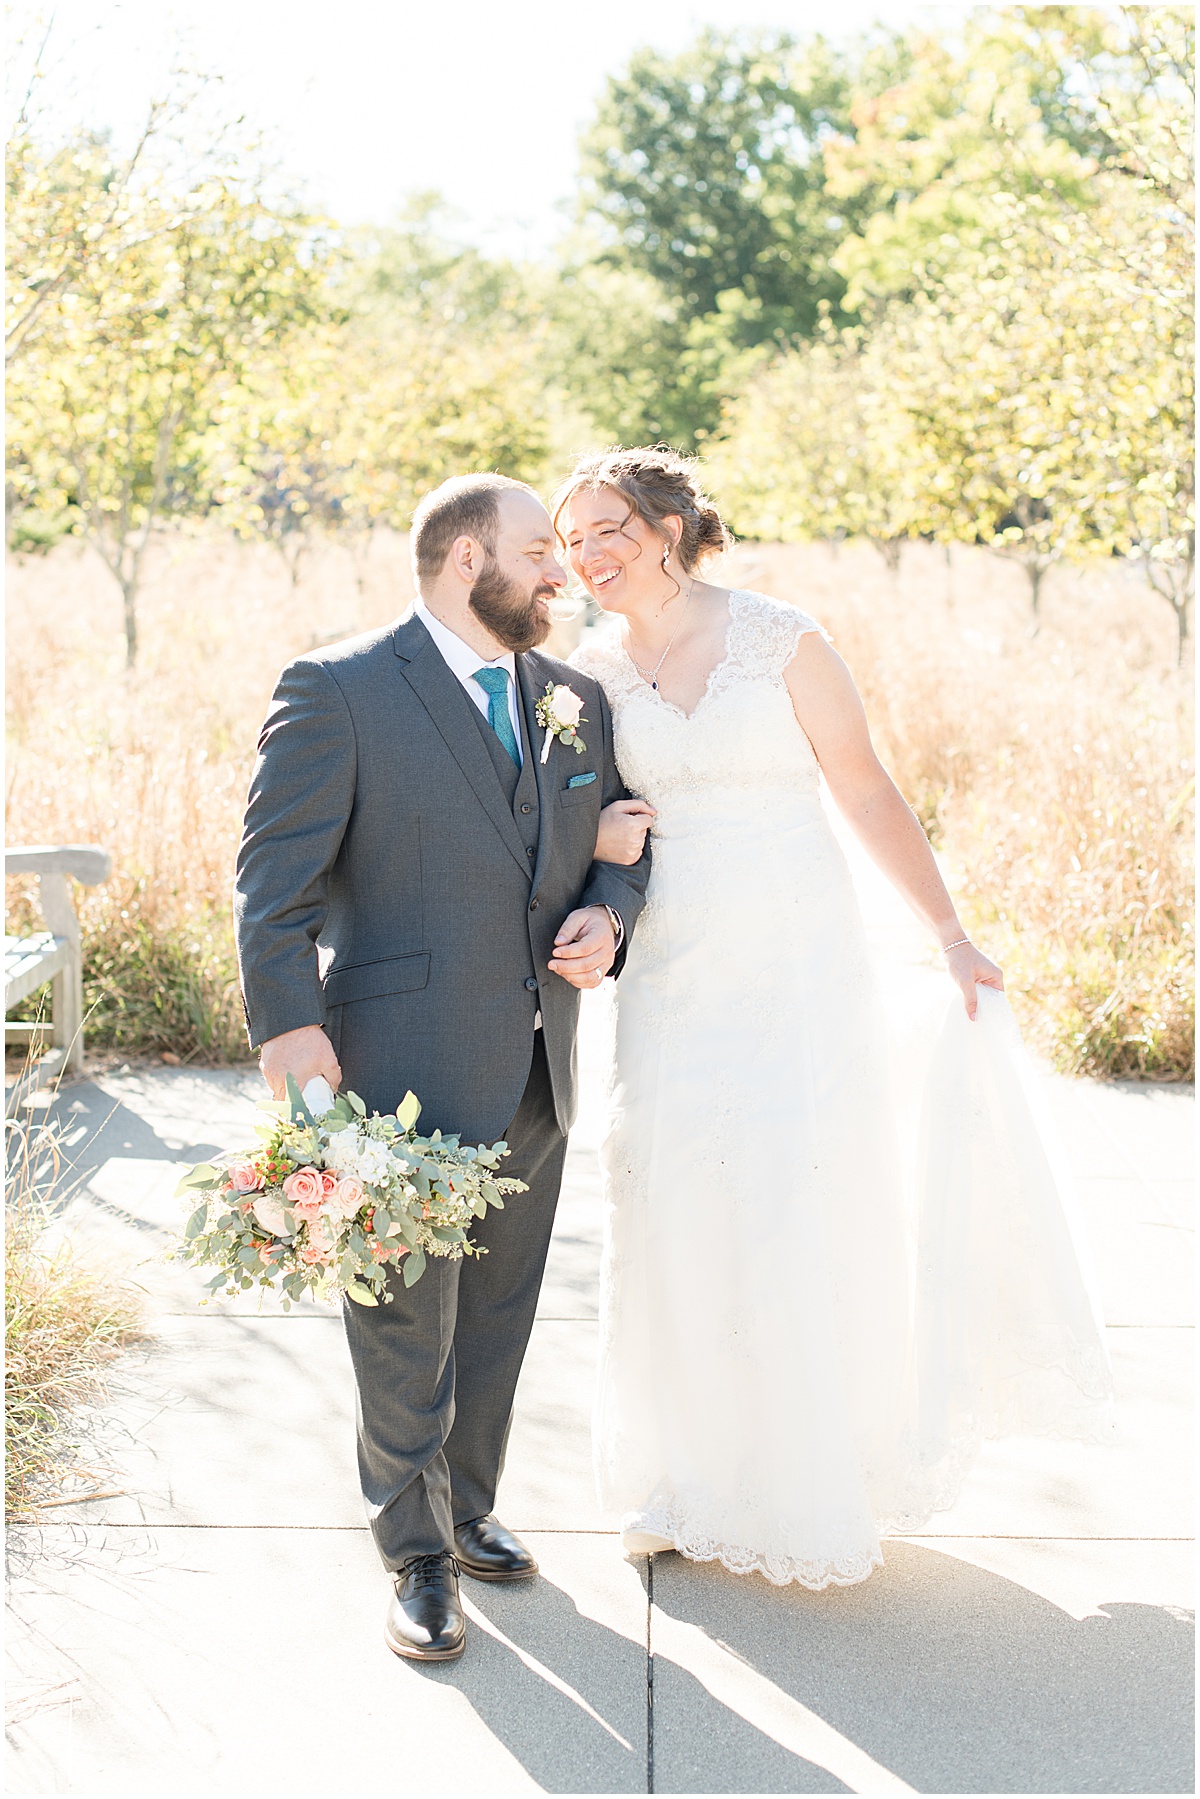 Couple photos for intimate wedding at Holliday Park in Indianapolis